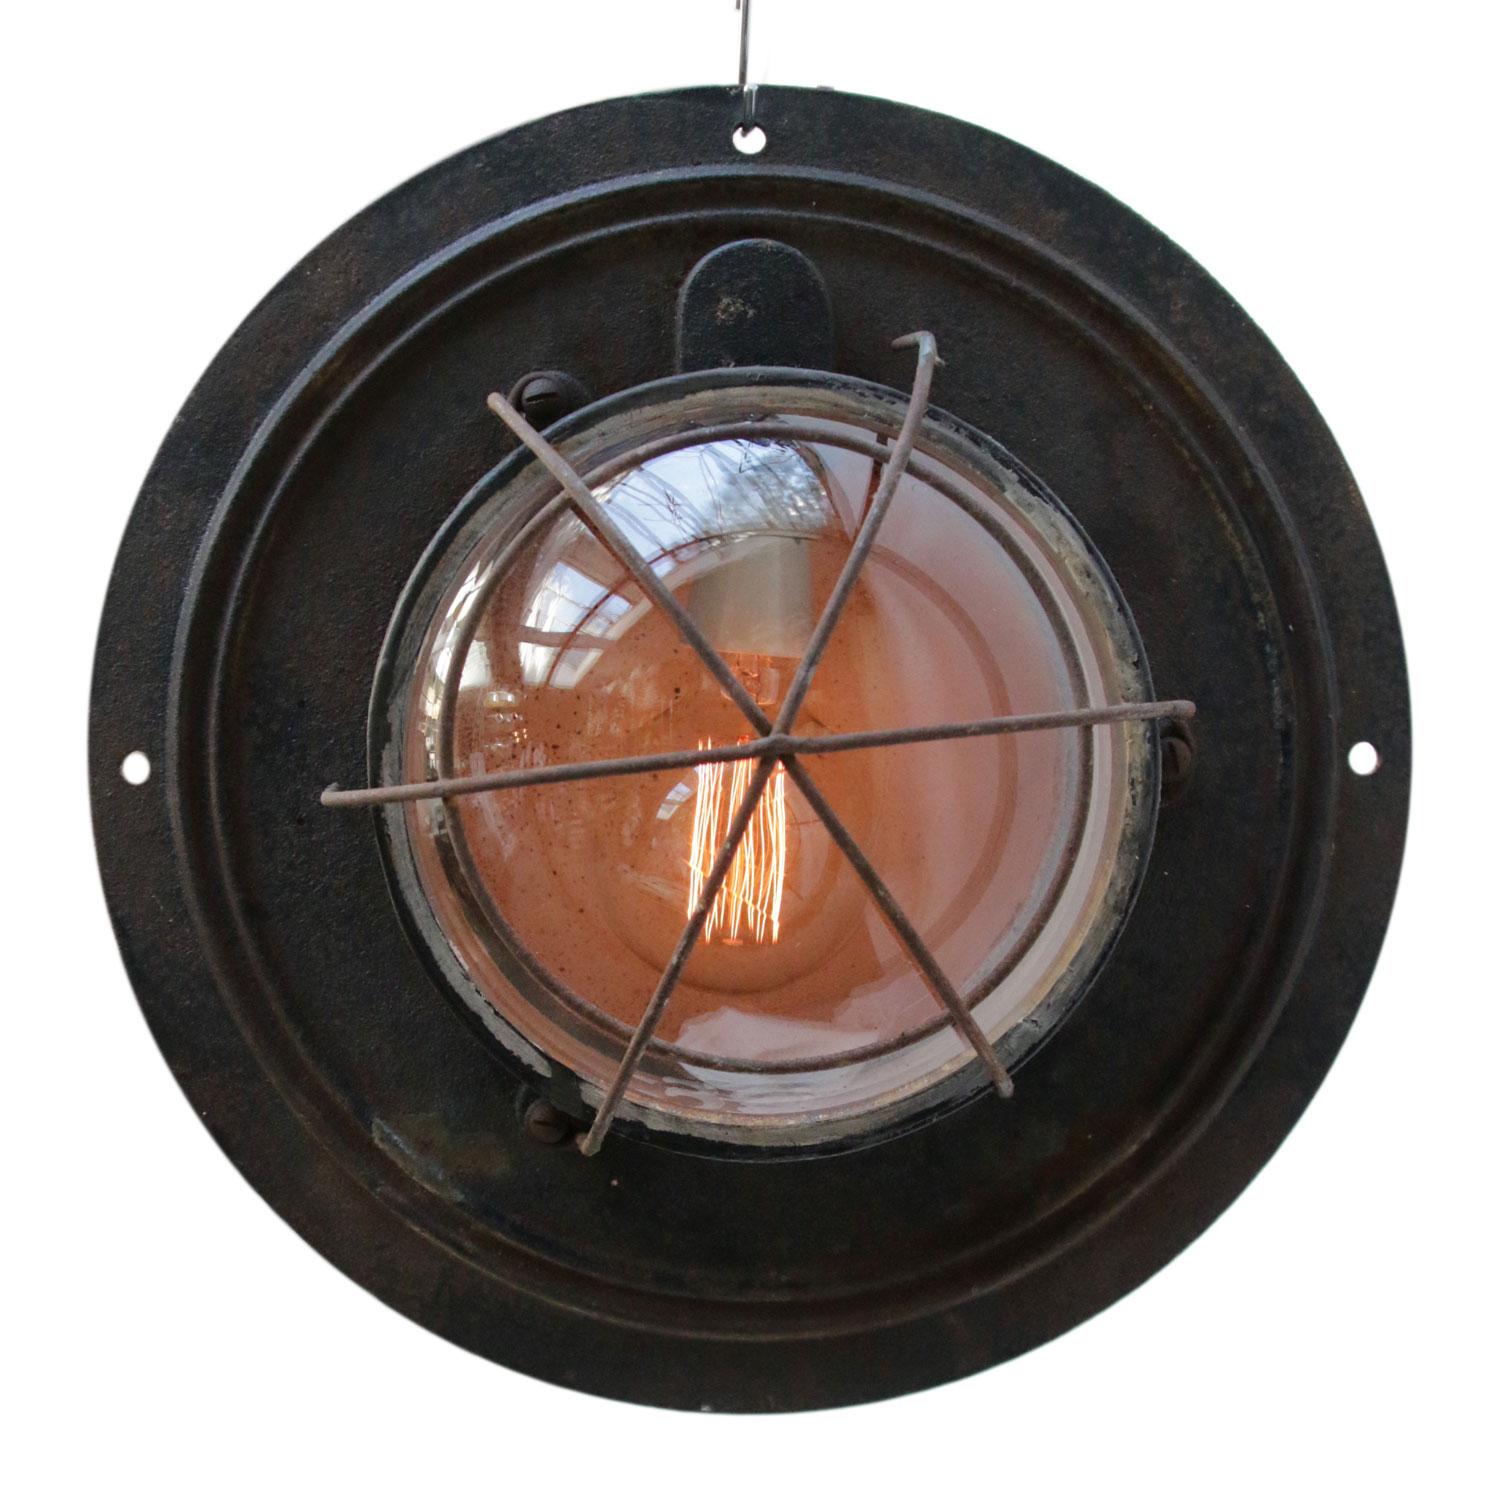 Cast iron industrial hanging light with clear glass.

Weight: 9.5 kg / 20.9 lb

All lamps have been made suitable by international standards for incandescent light bulbs, energy-efficient and LED bulbs. E26/E27 bulb holders and new wiring are CE